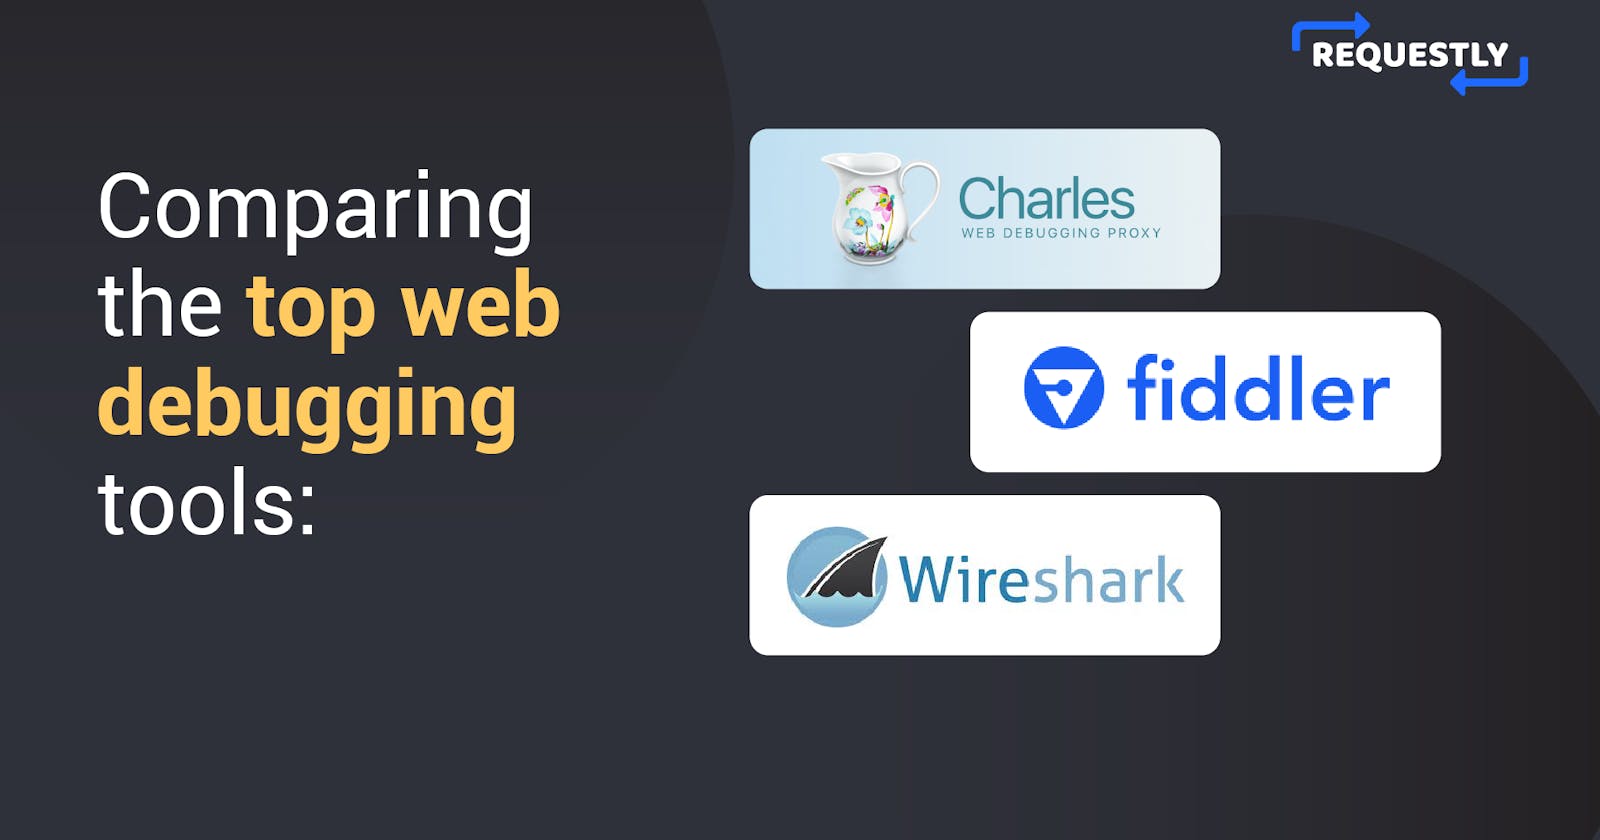 Comparing Charles Proxy, Fiddler, and Wireshark